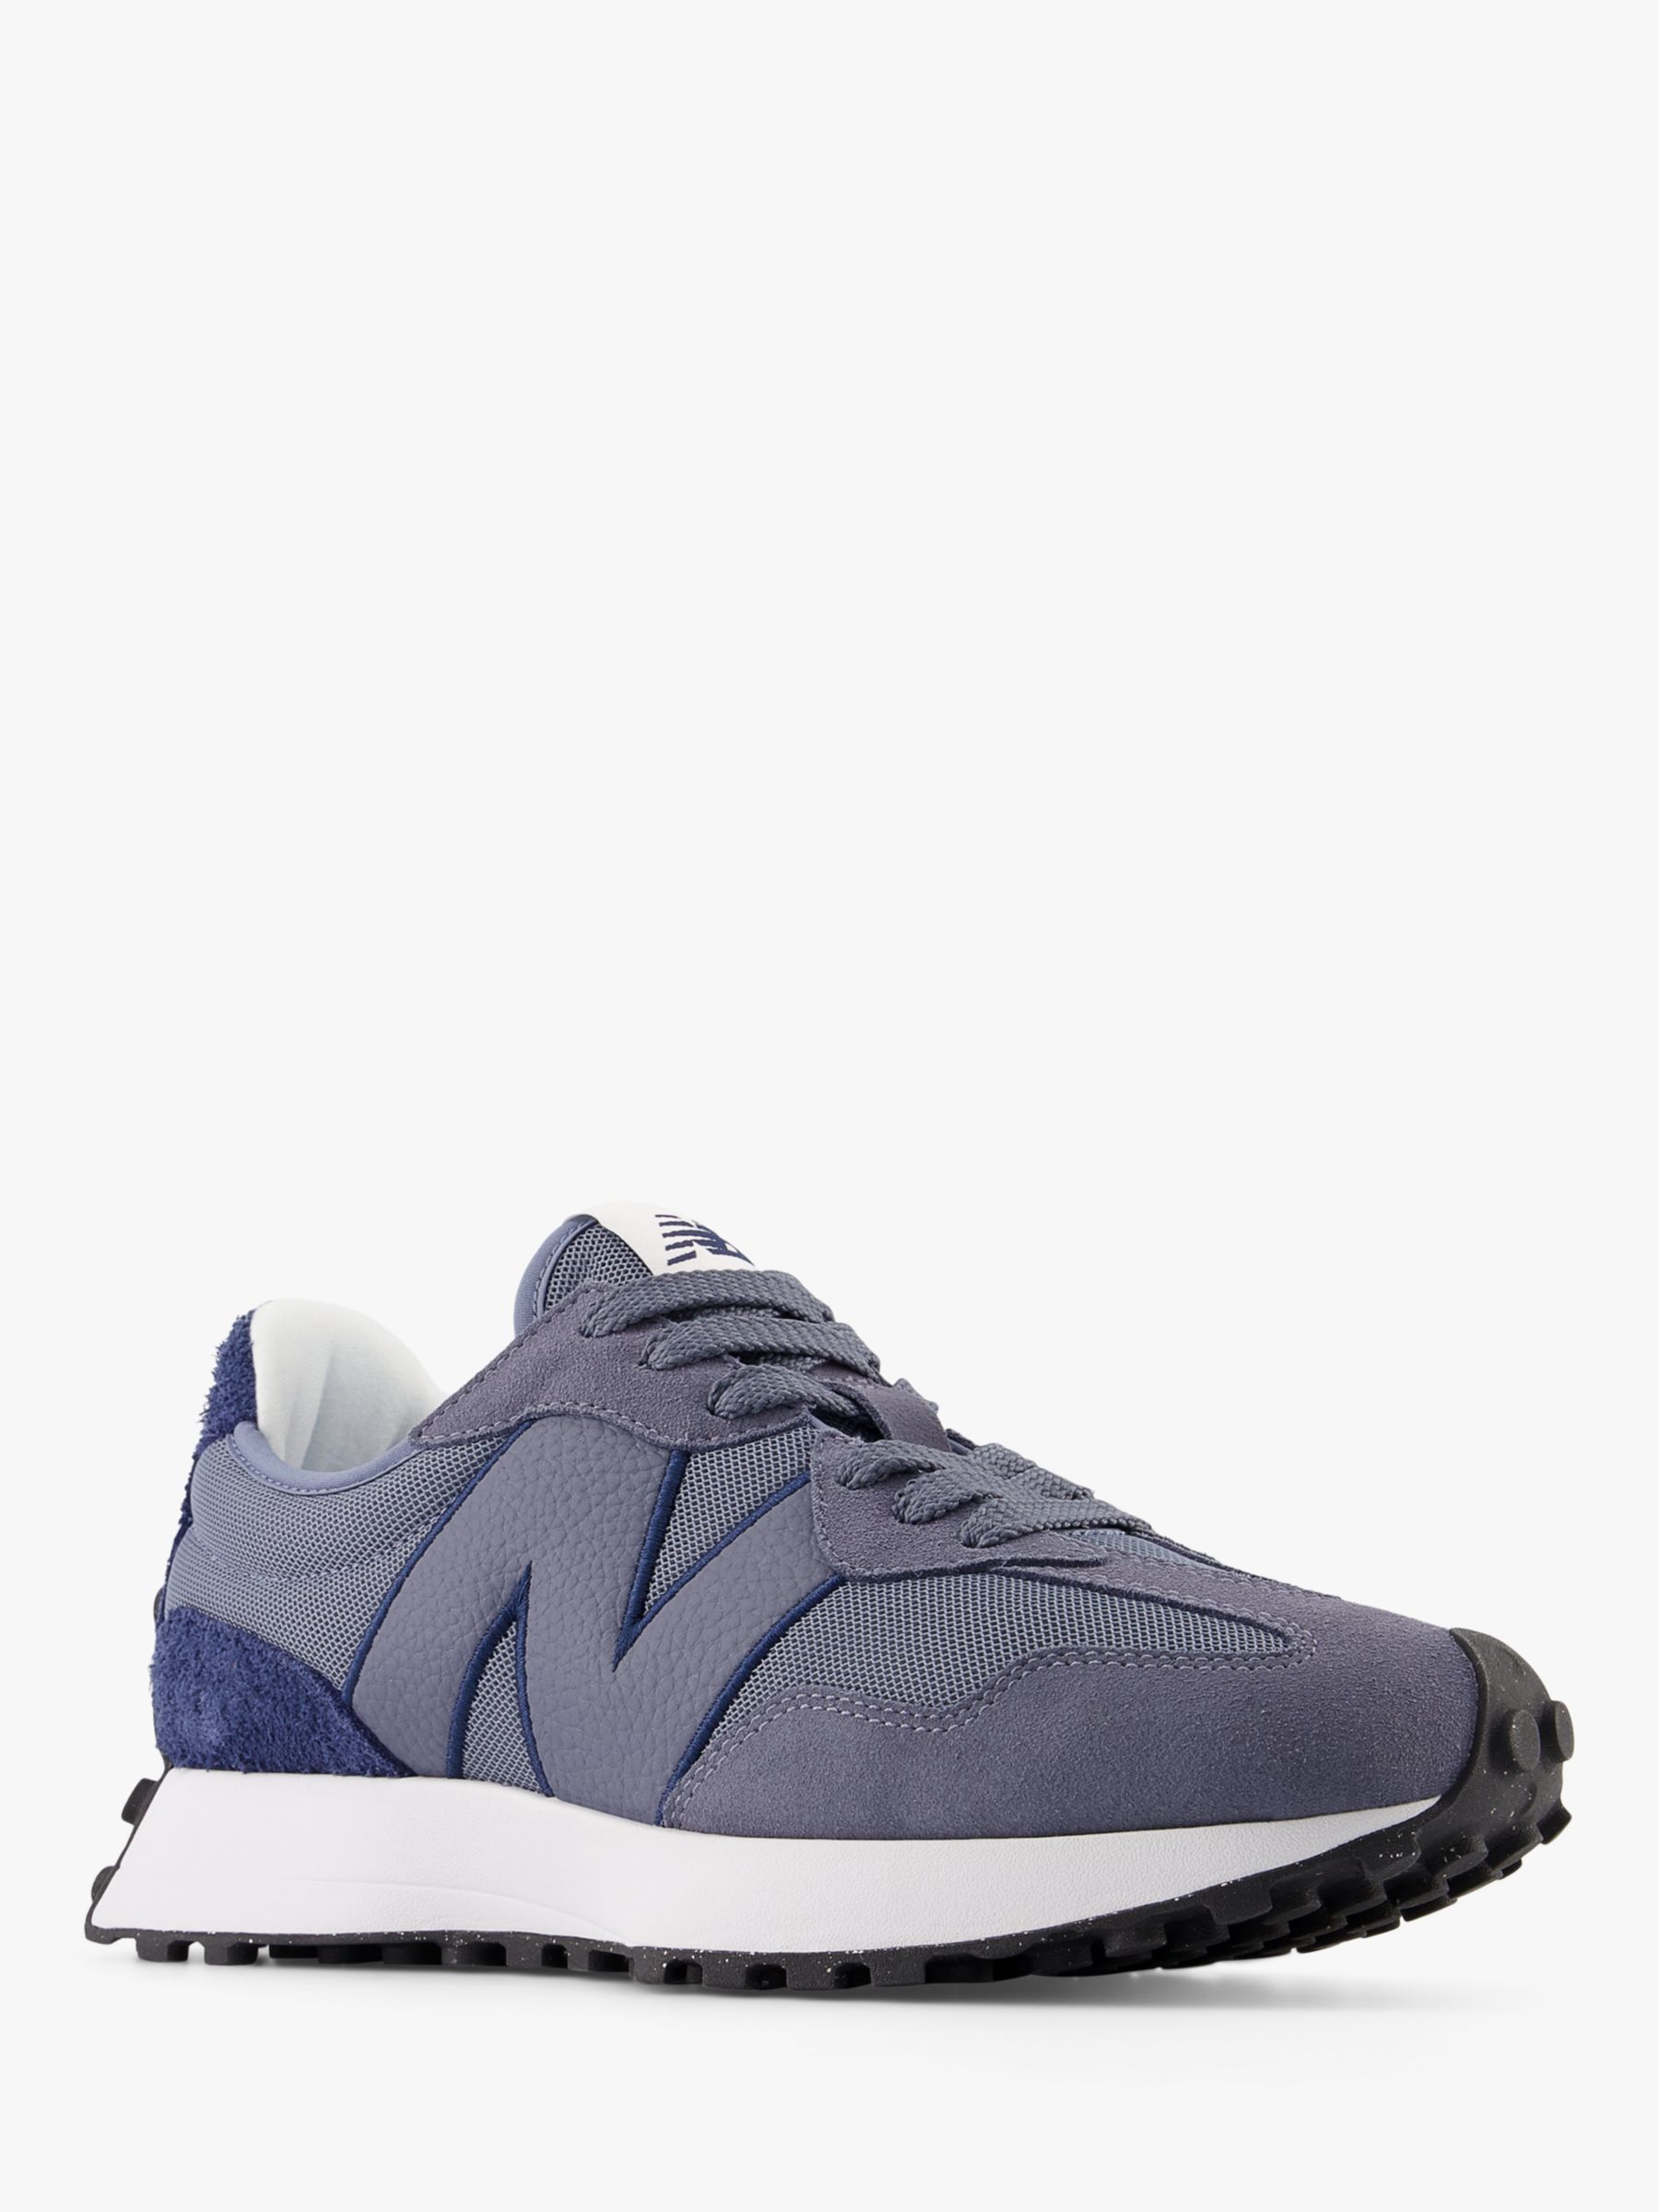 Buy New Balance 327 Classic Suede Mesh Trainers Online at johnlewis.com